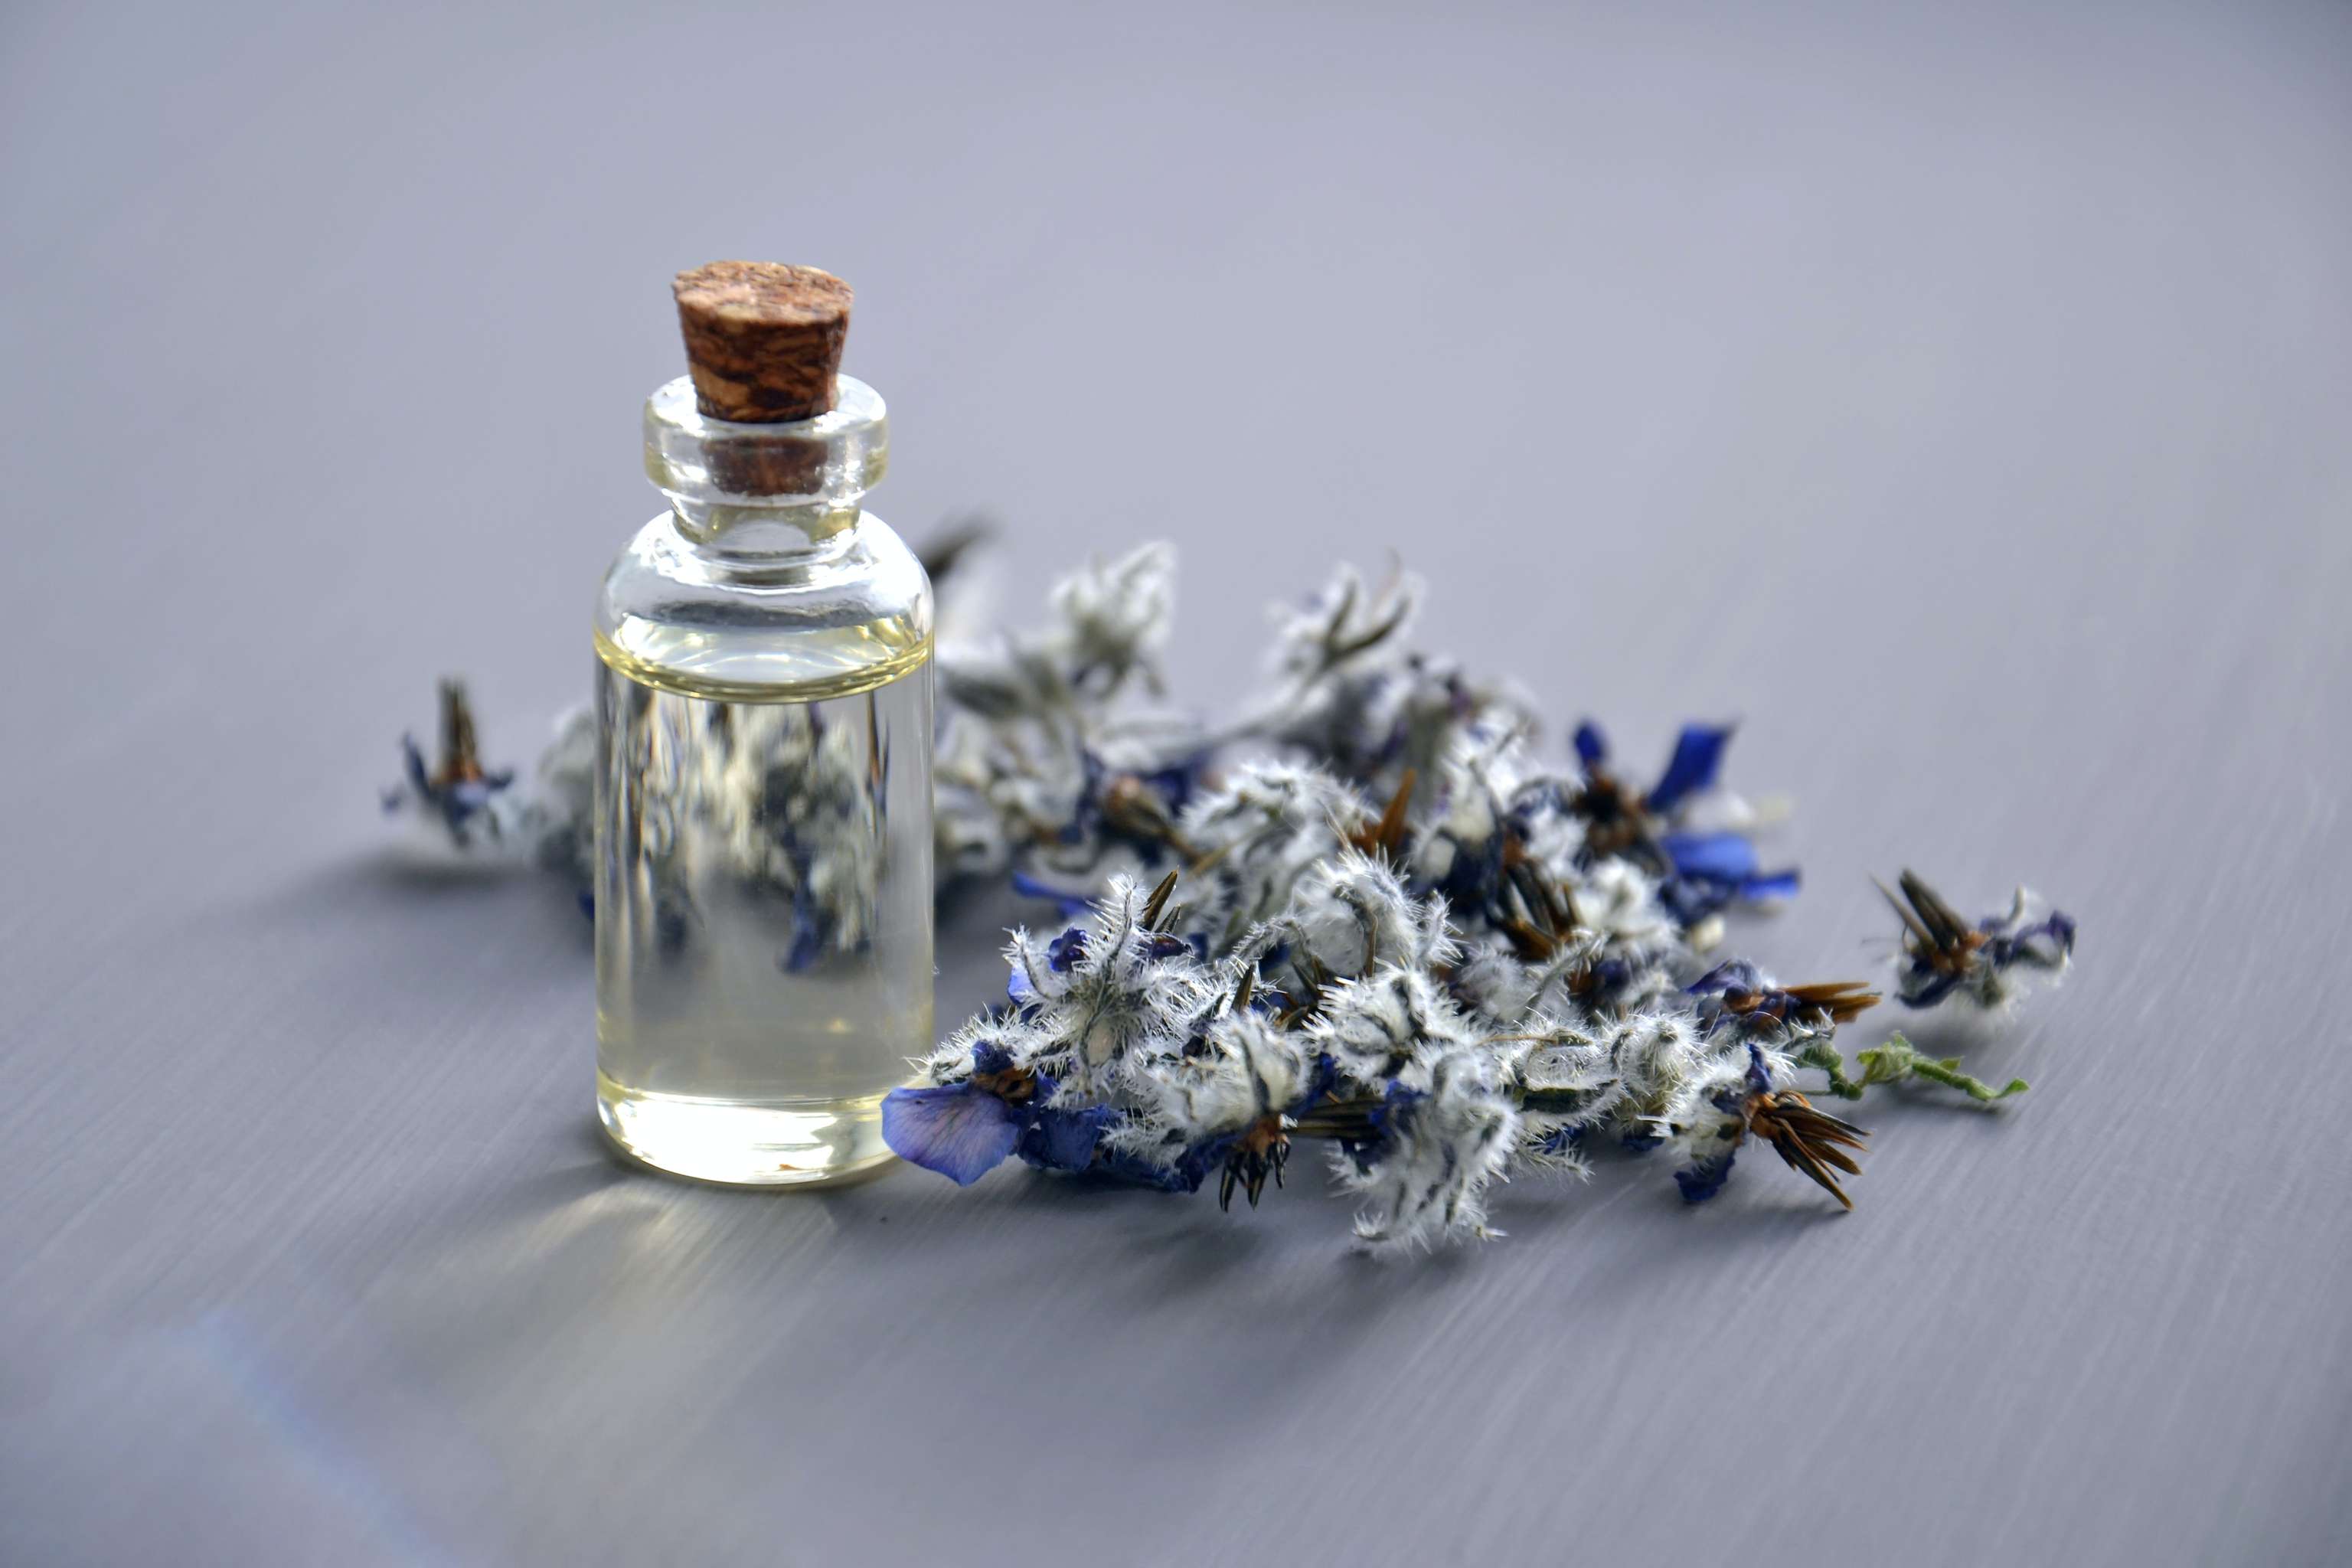 Does aromatherapy work for Alzheimer's?